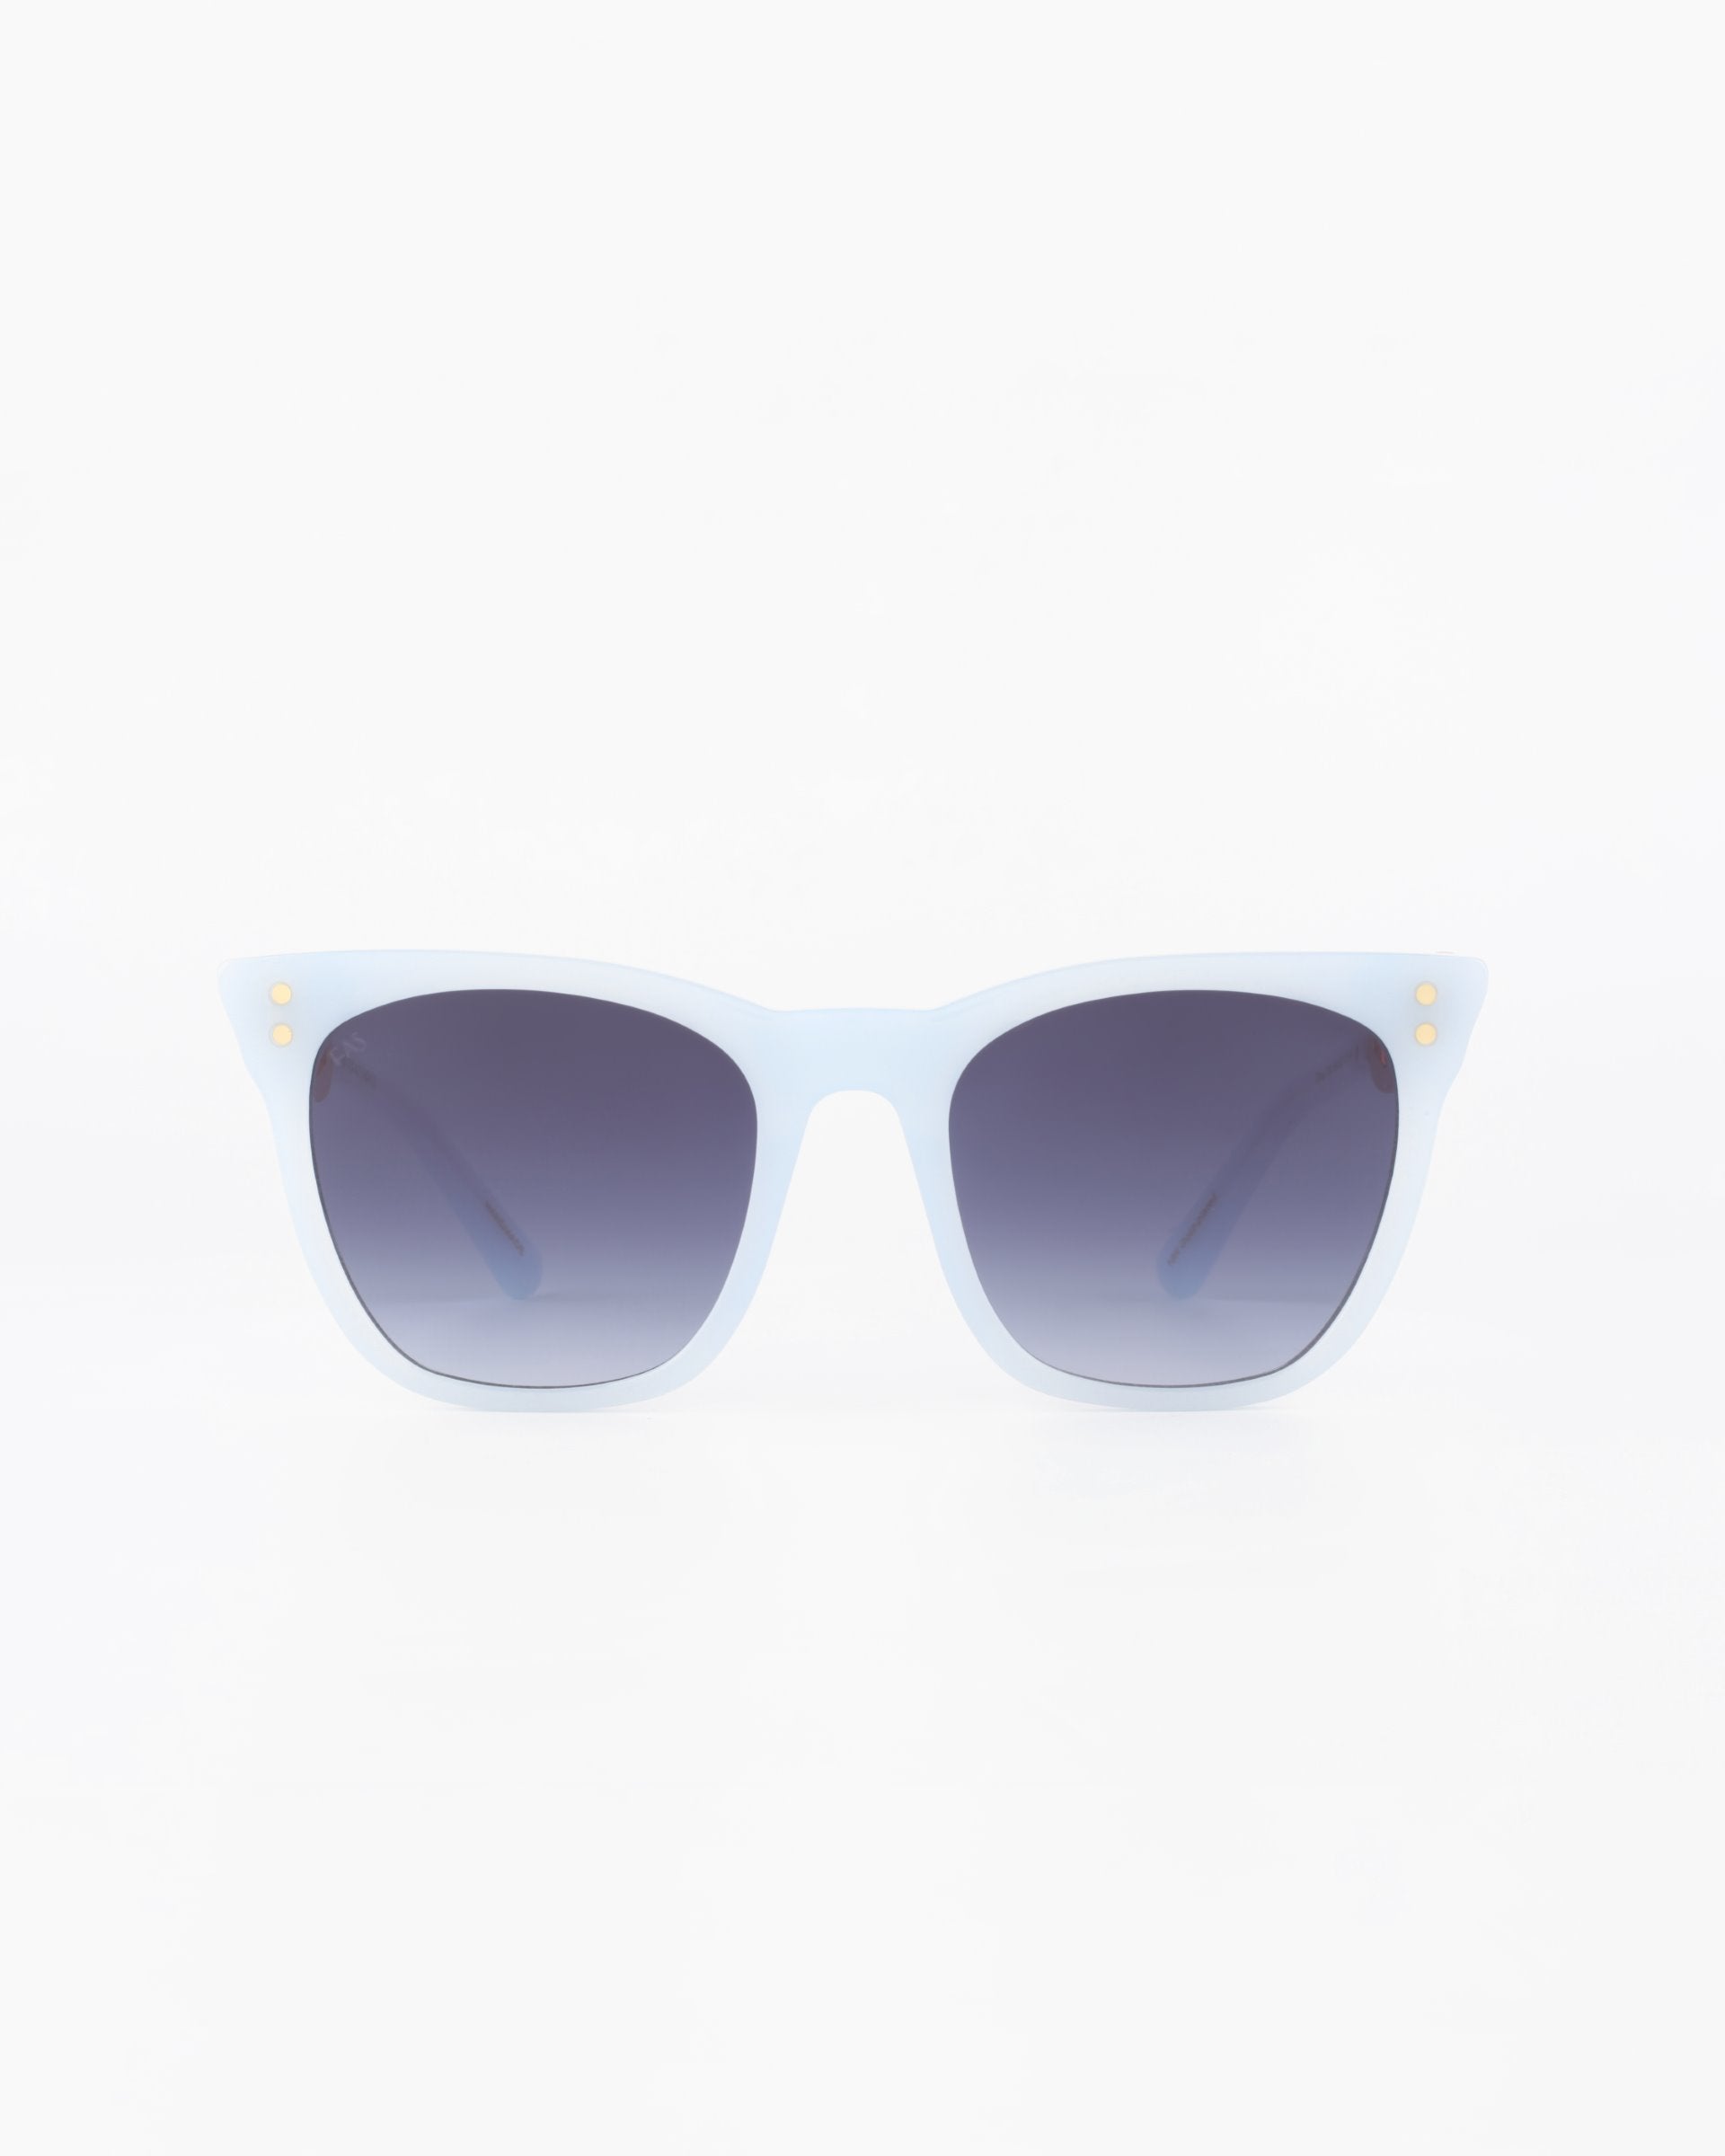 A pair of stylish cat-eye sunglasses named Deco from For Art&#39;s Sake® with a light blue acetate frame and dark, ombre lenses sits against a plain white background. The frame has subtle gold accents near the temples.